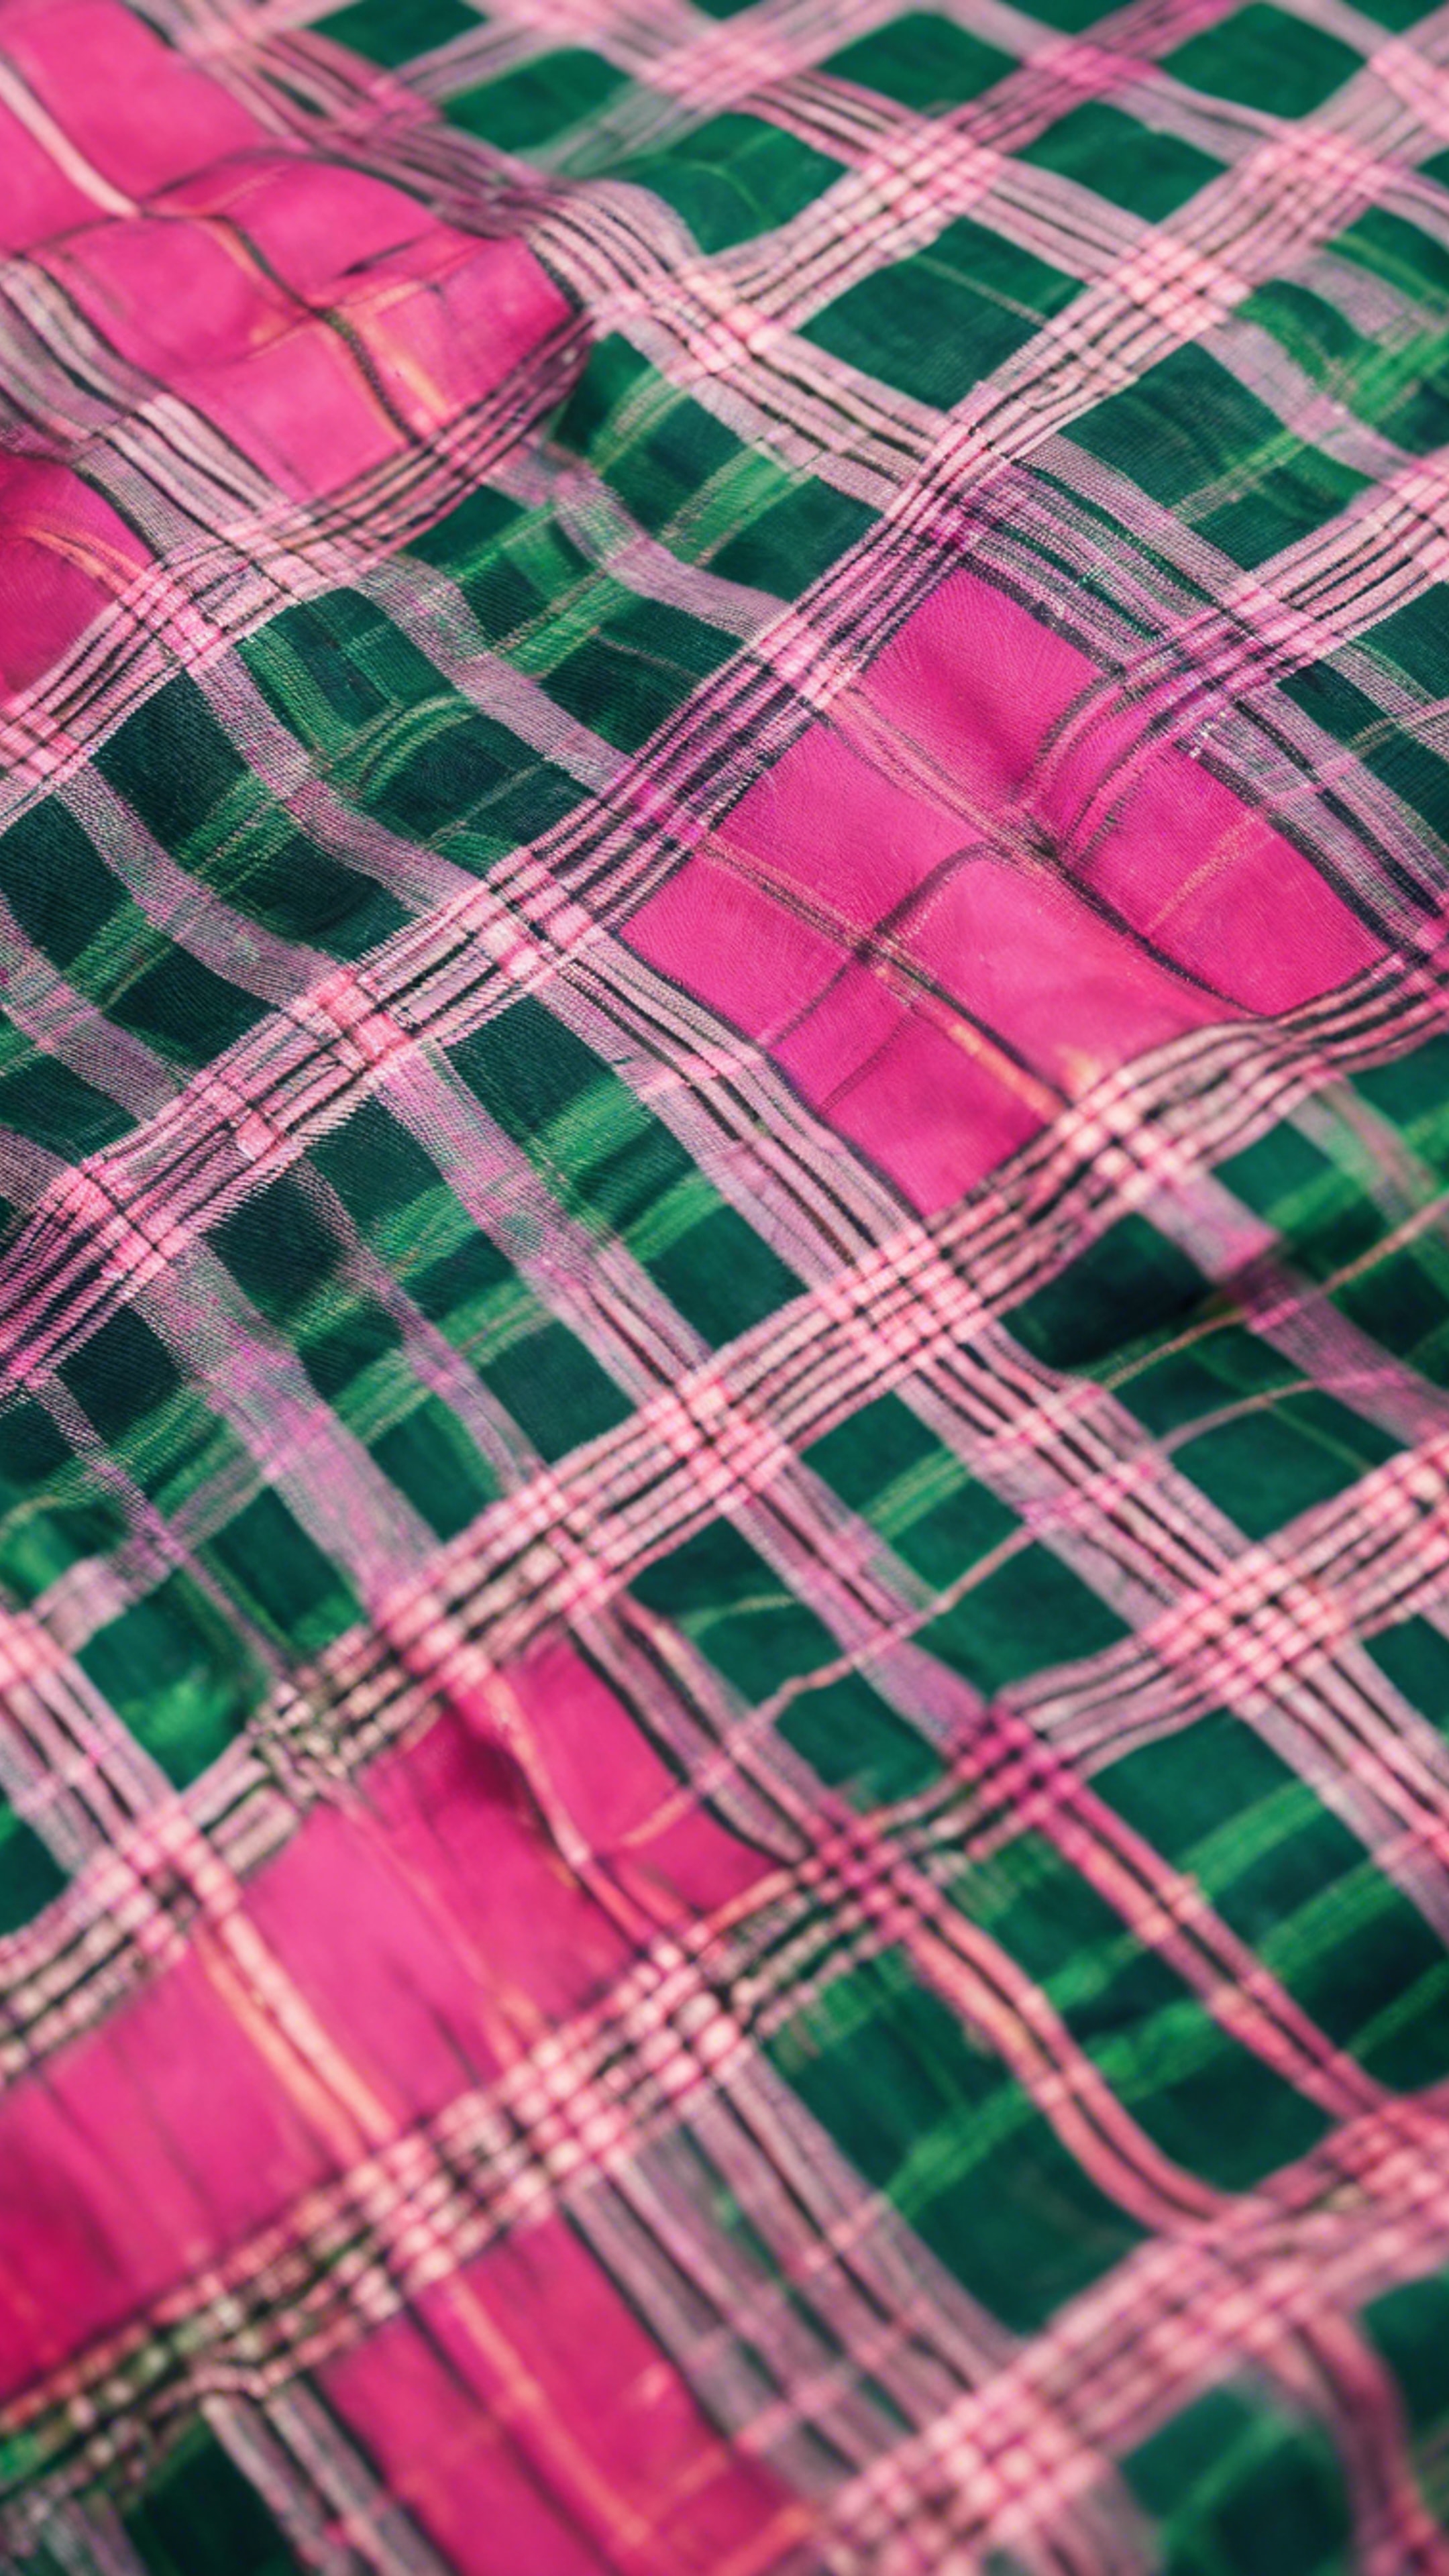 A vibrant green and pink tartan pattern covering a preppy summer coat.壁紙[87107d8556aa4441ace0]